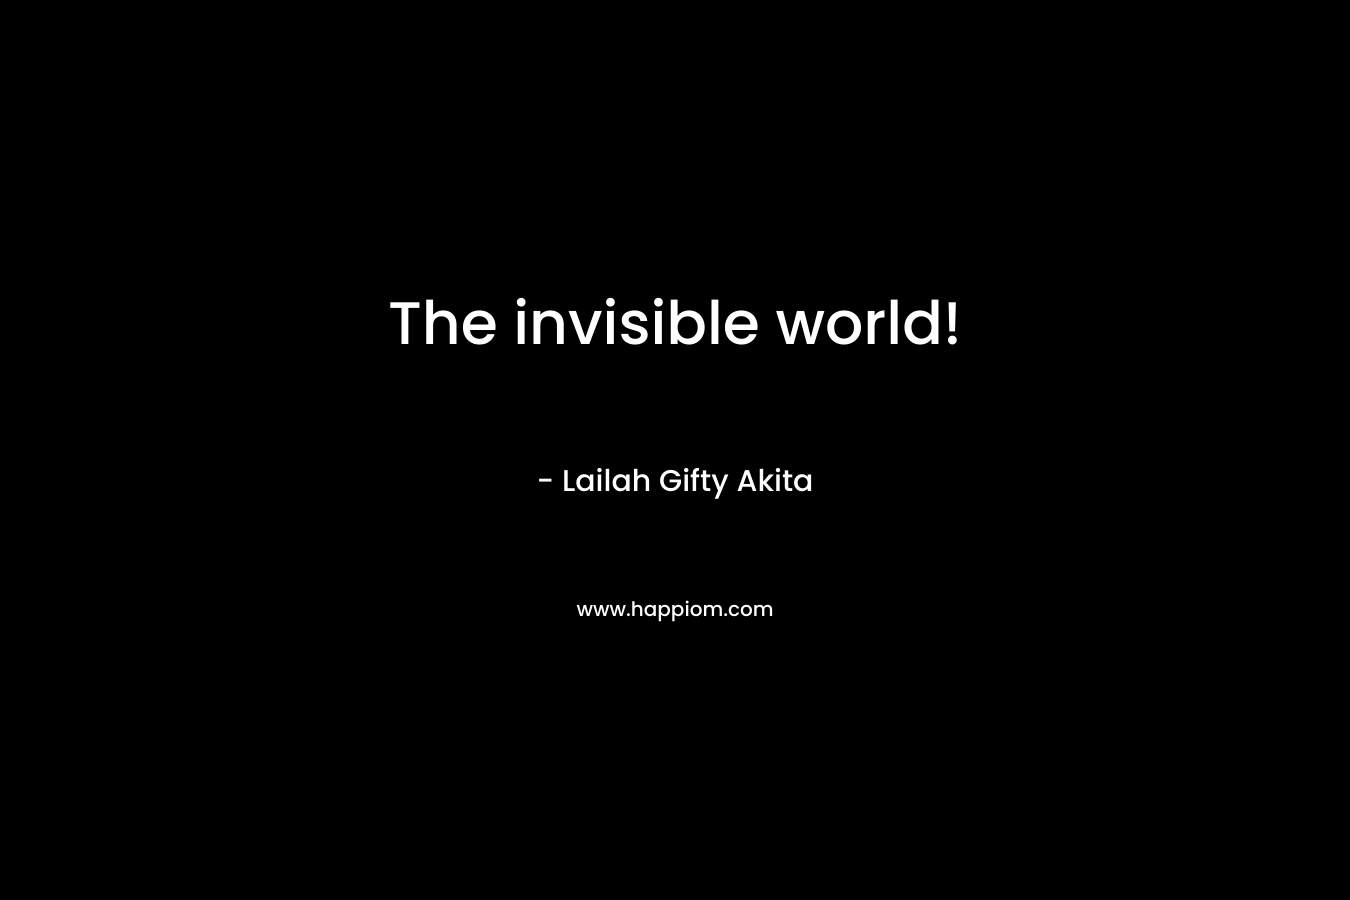 The invisible world!